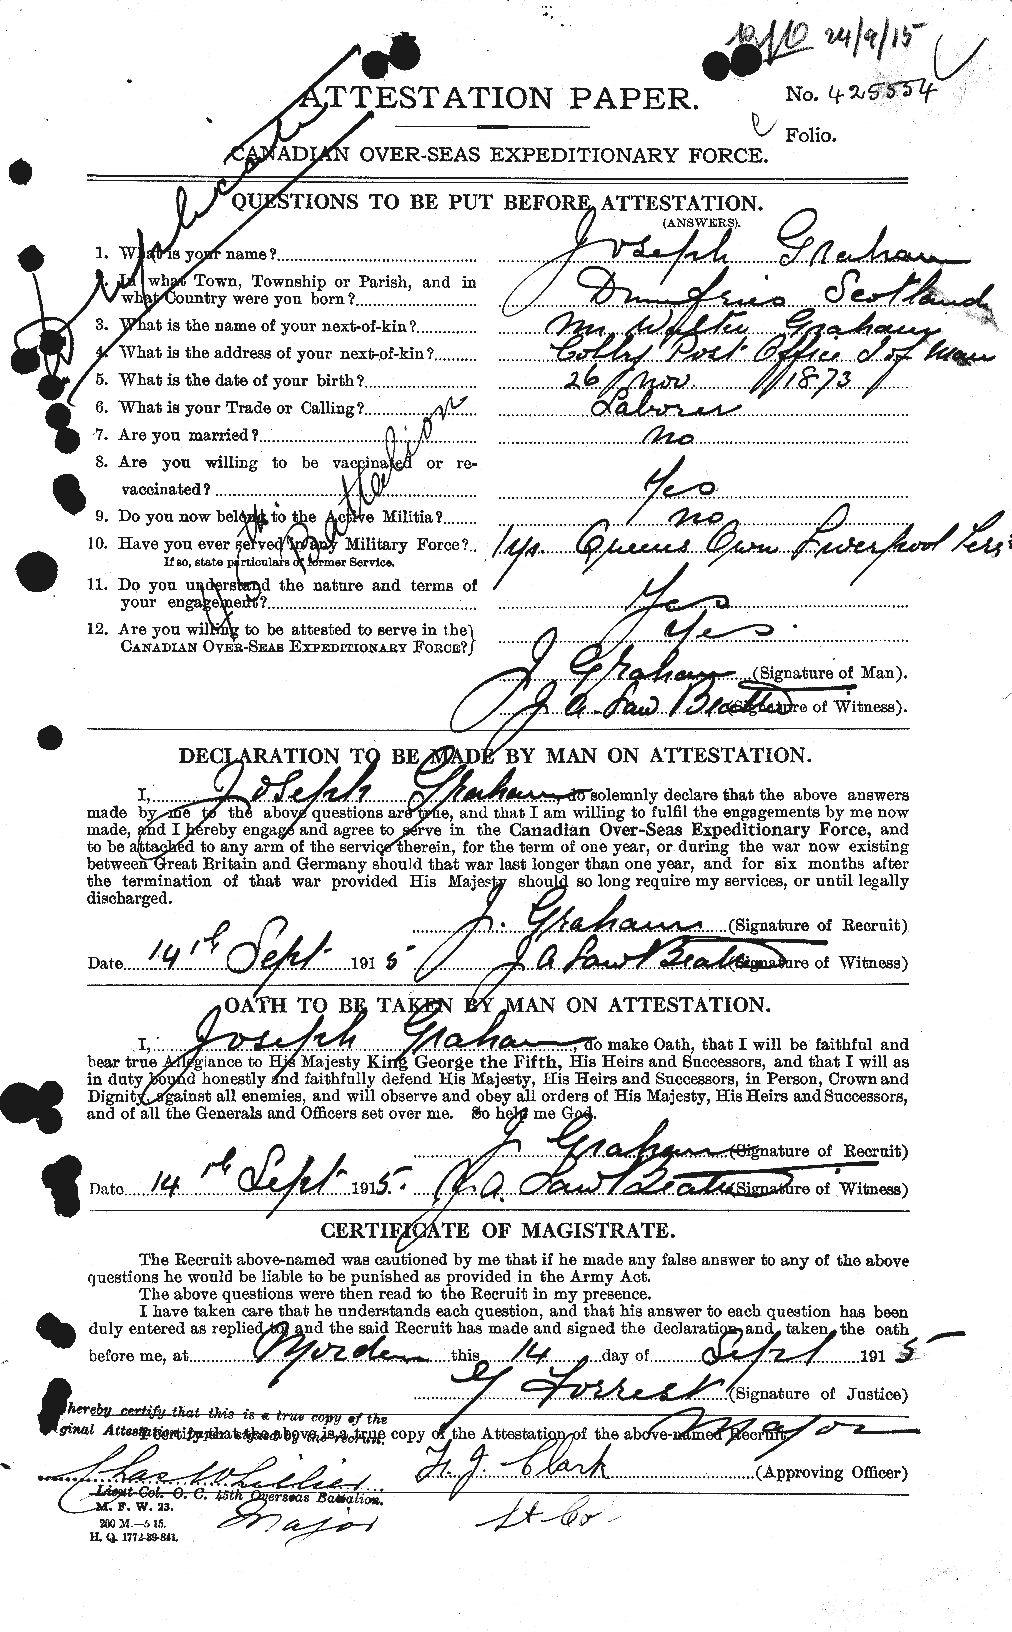 Personnel Records of the First World War - CEF 359233a